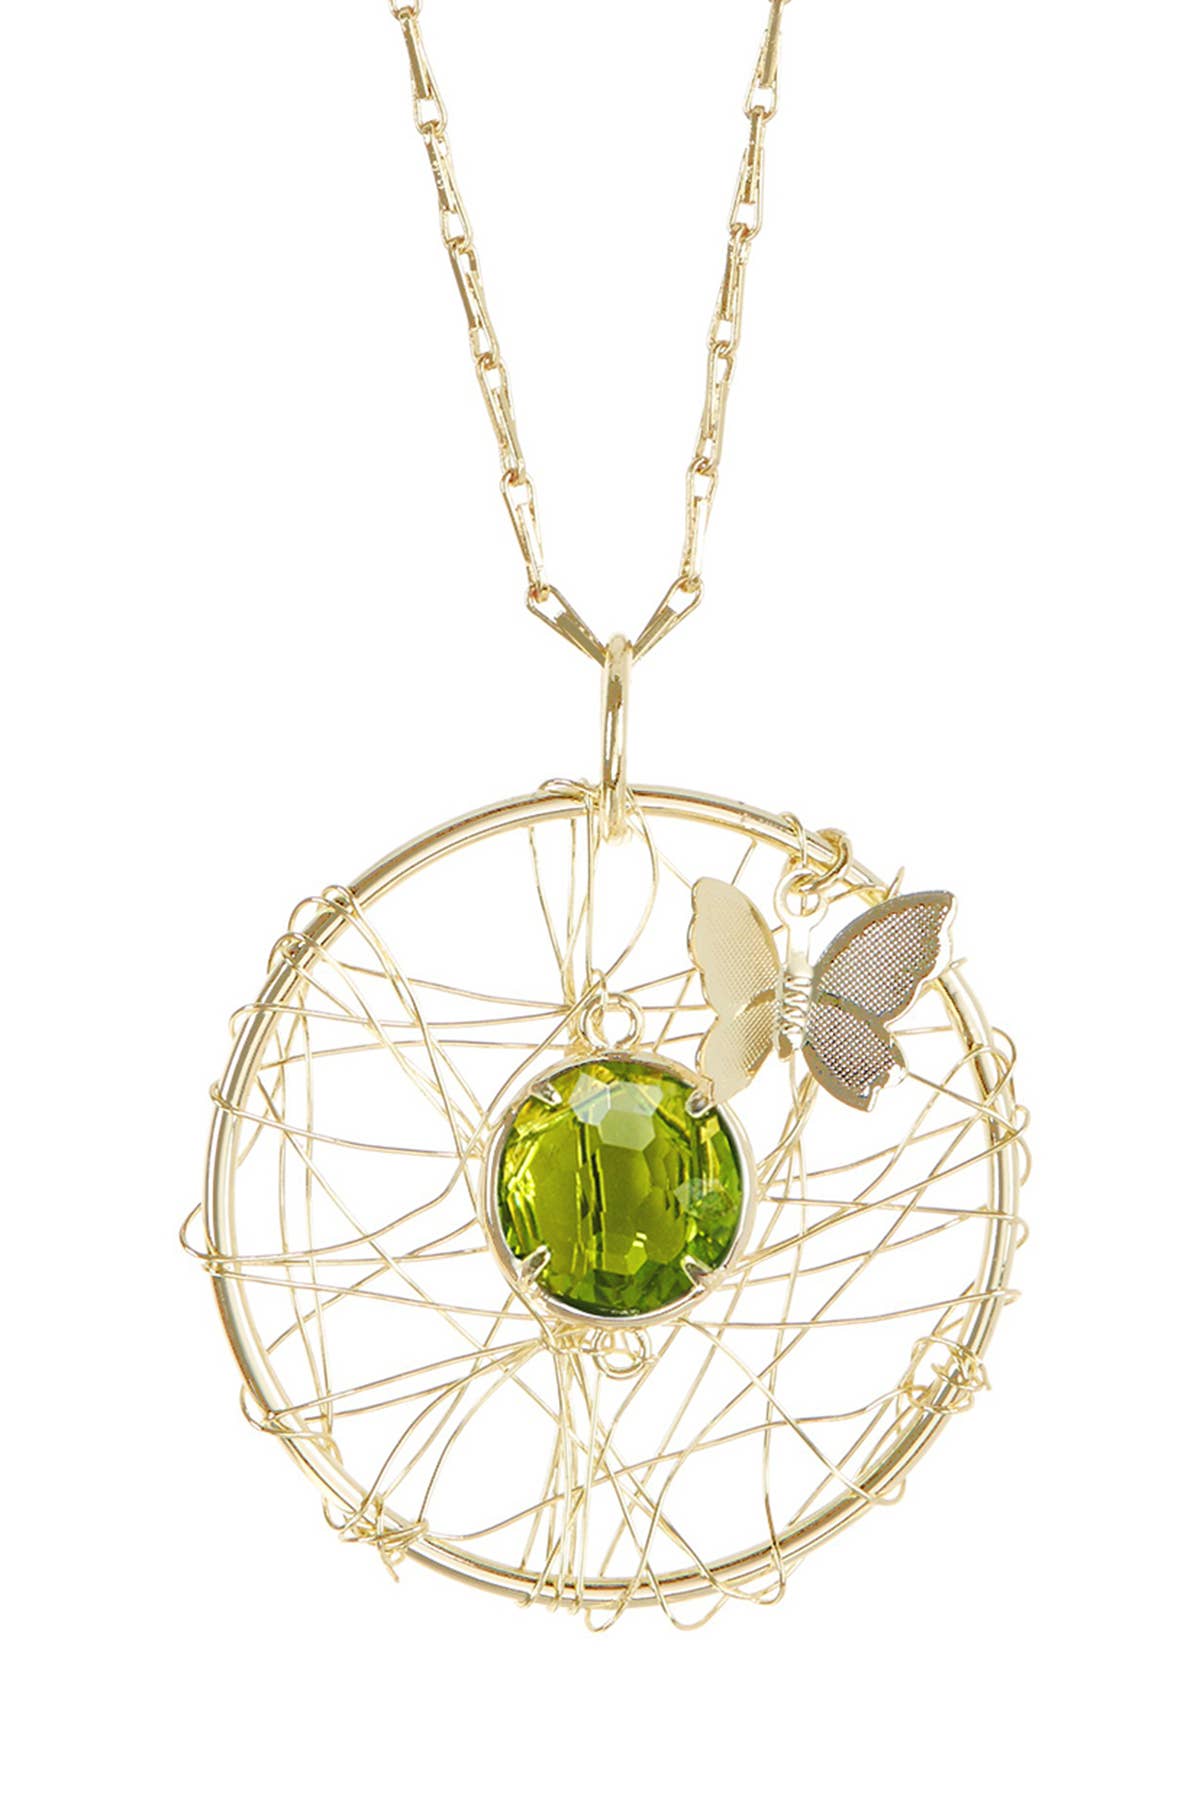 14k Gold Plated & Peridot Crystal Dreamcatcher Necklace - GF